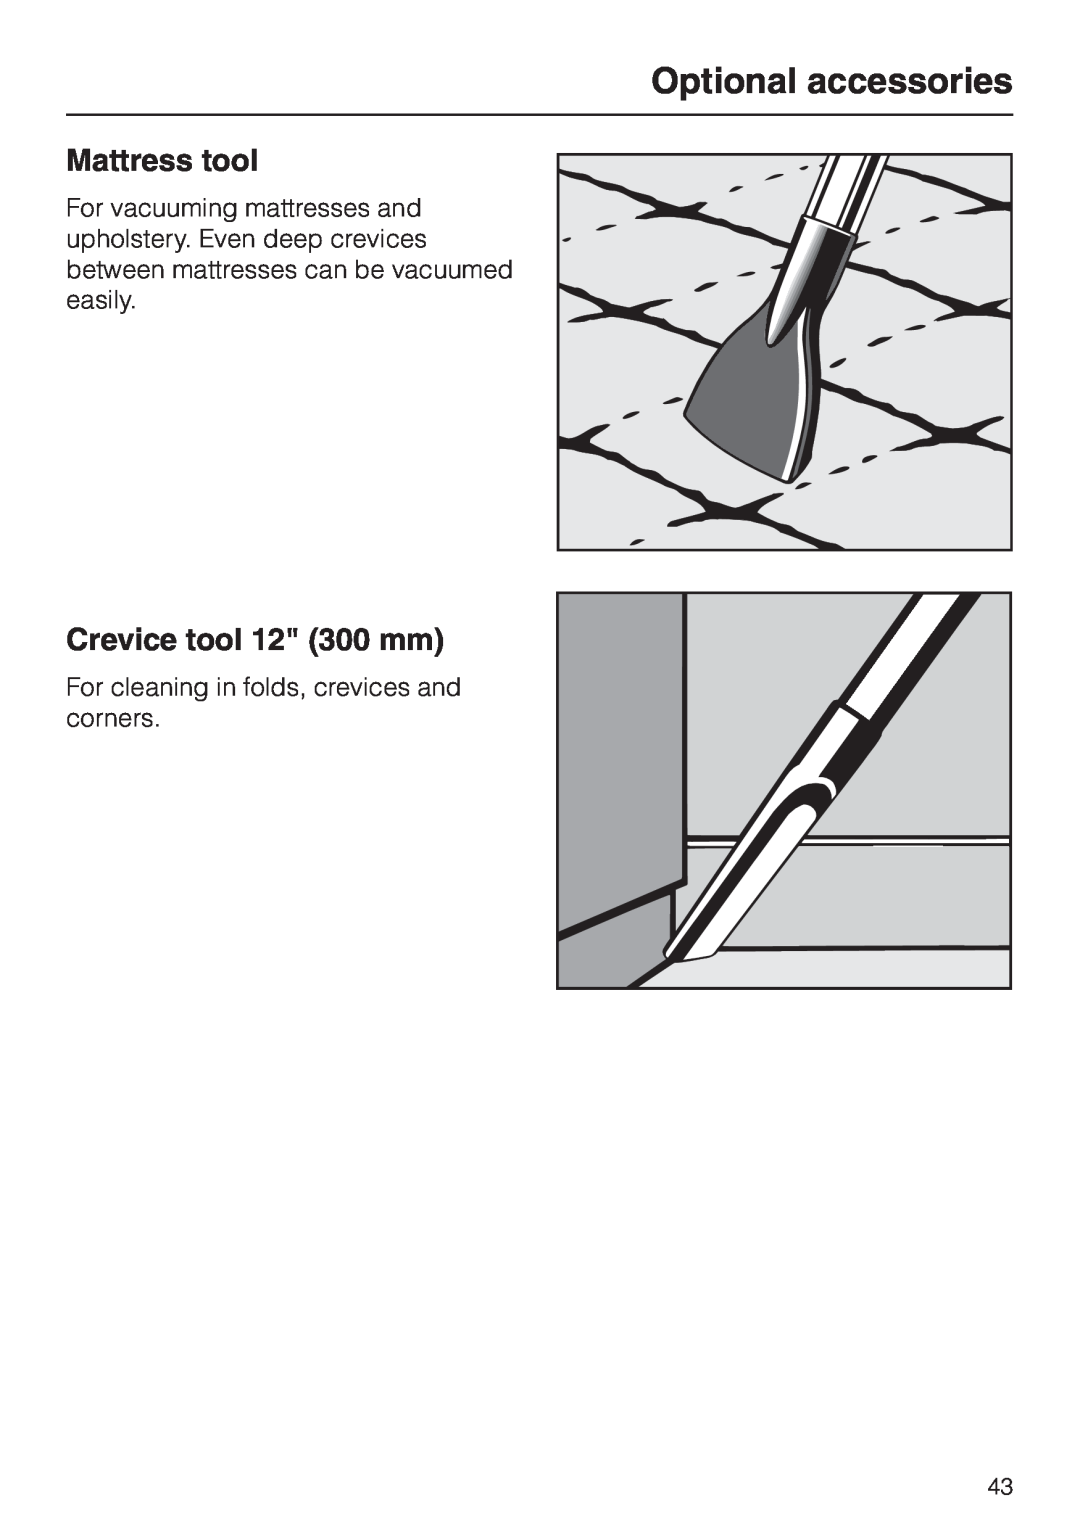 Miele S 658 manual Mattress tool, Crevice tool 12 300 mm, Optional accessories, For cleaning in folds, crevices and corners 